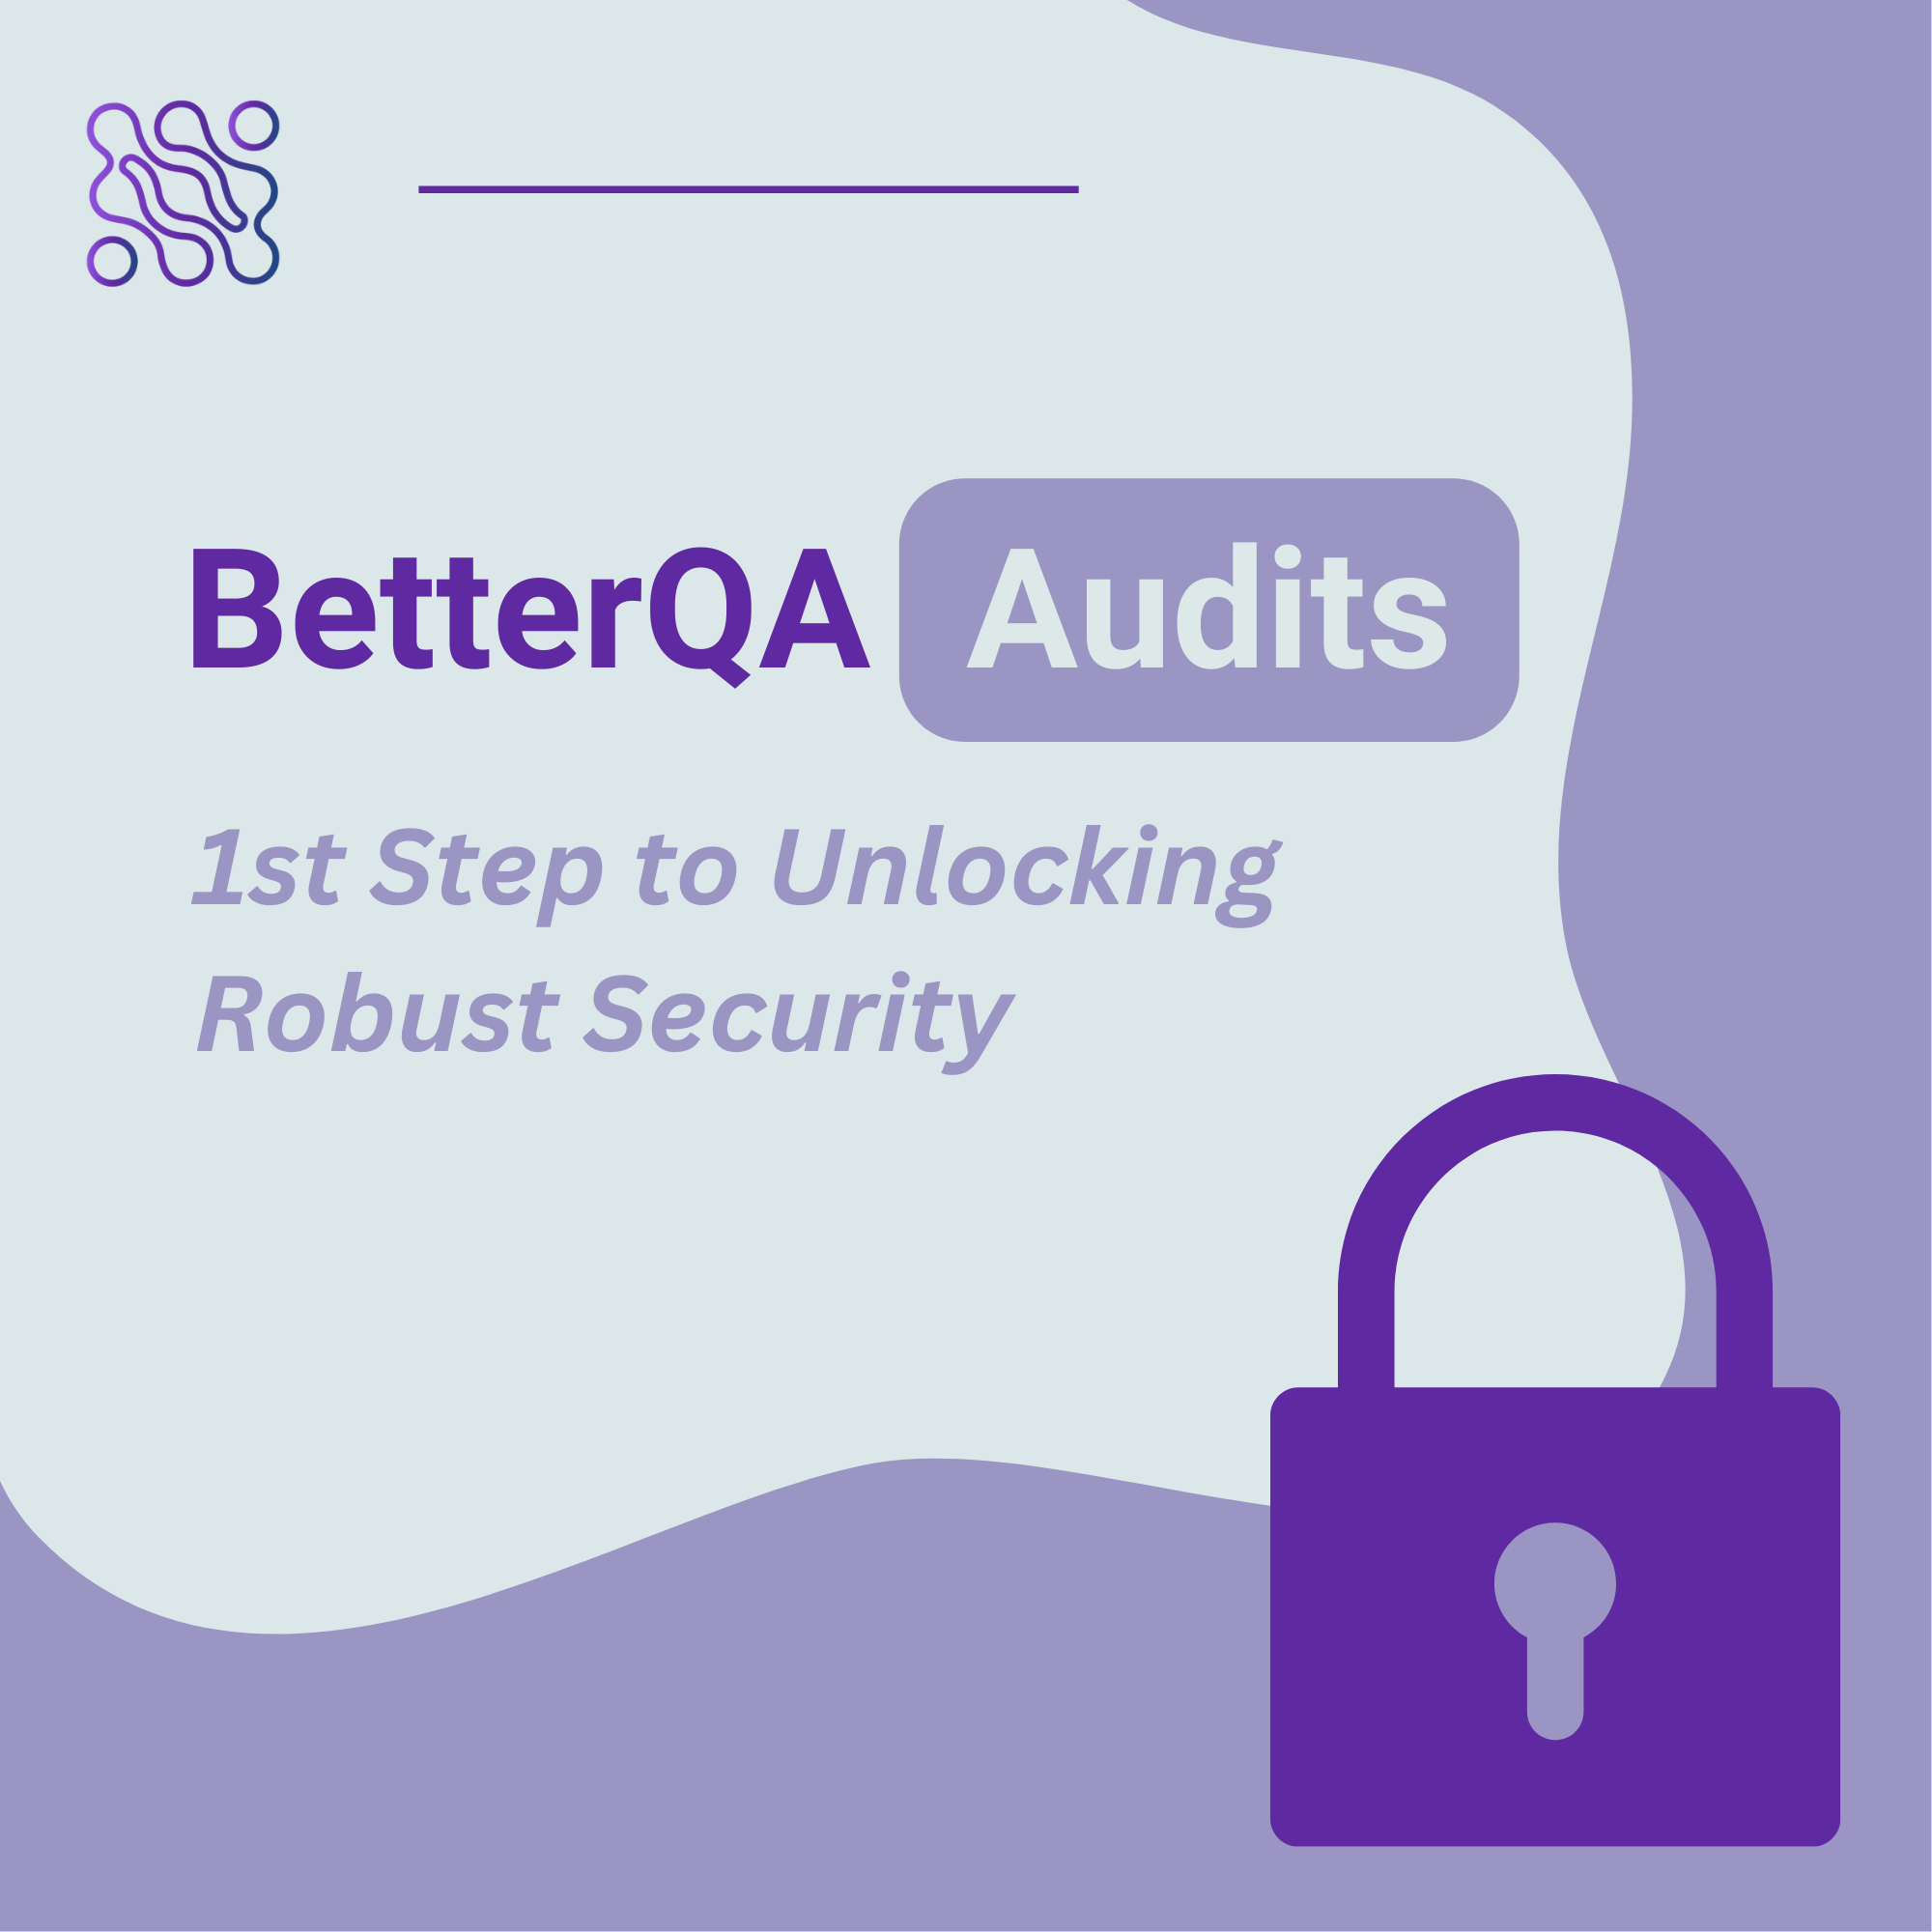 BetterQA Audits 1st Step to Unlocking Robust Security